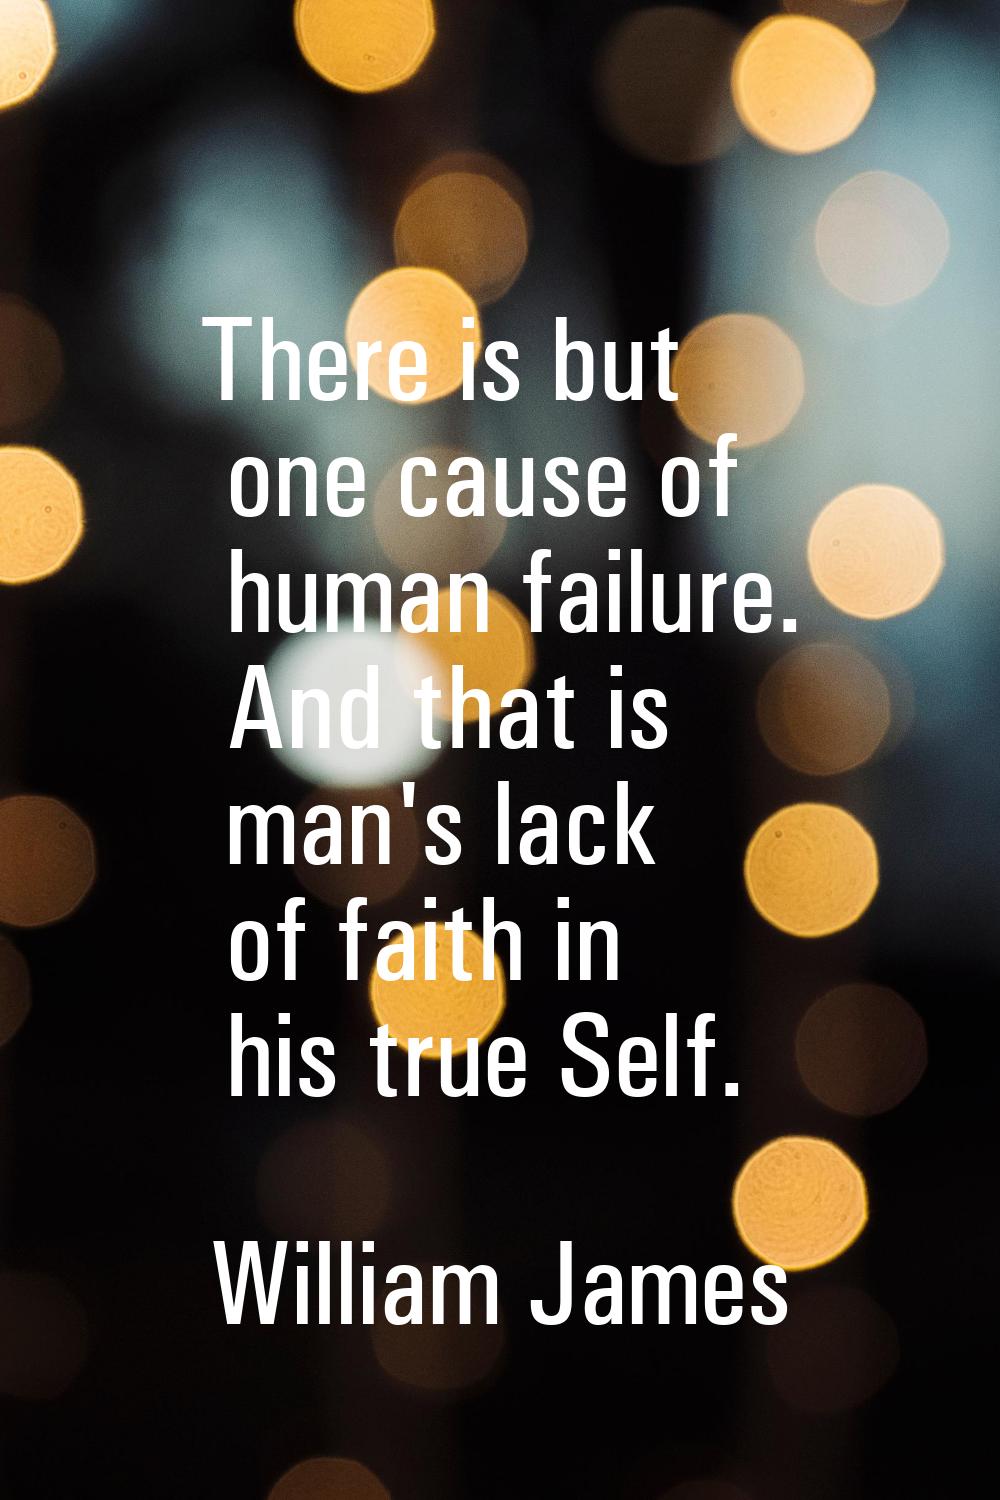 There is but one cause of human failure. And that is man's lack of faith in his true Self.